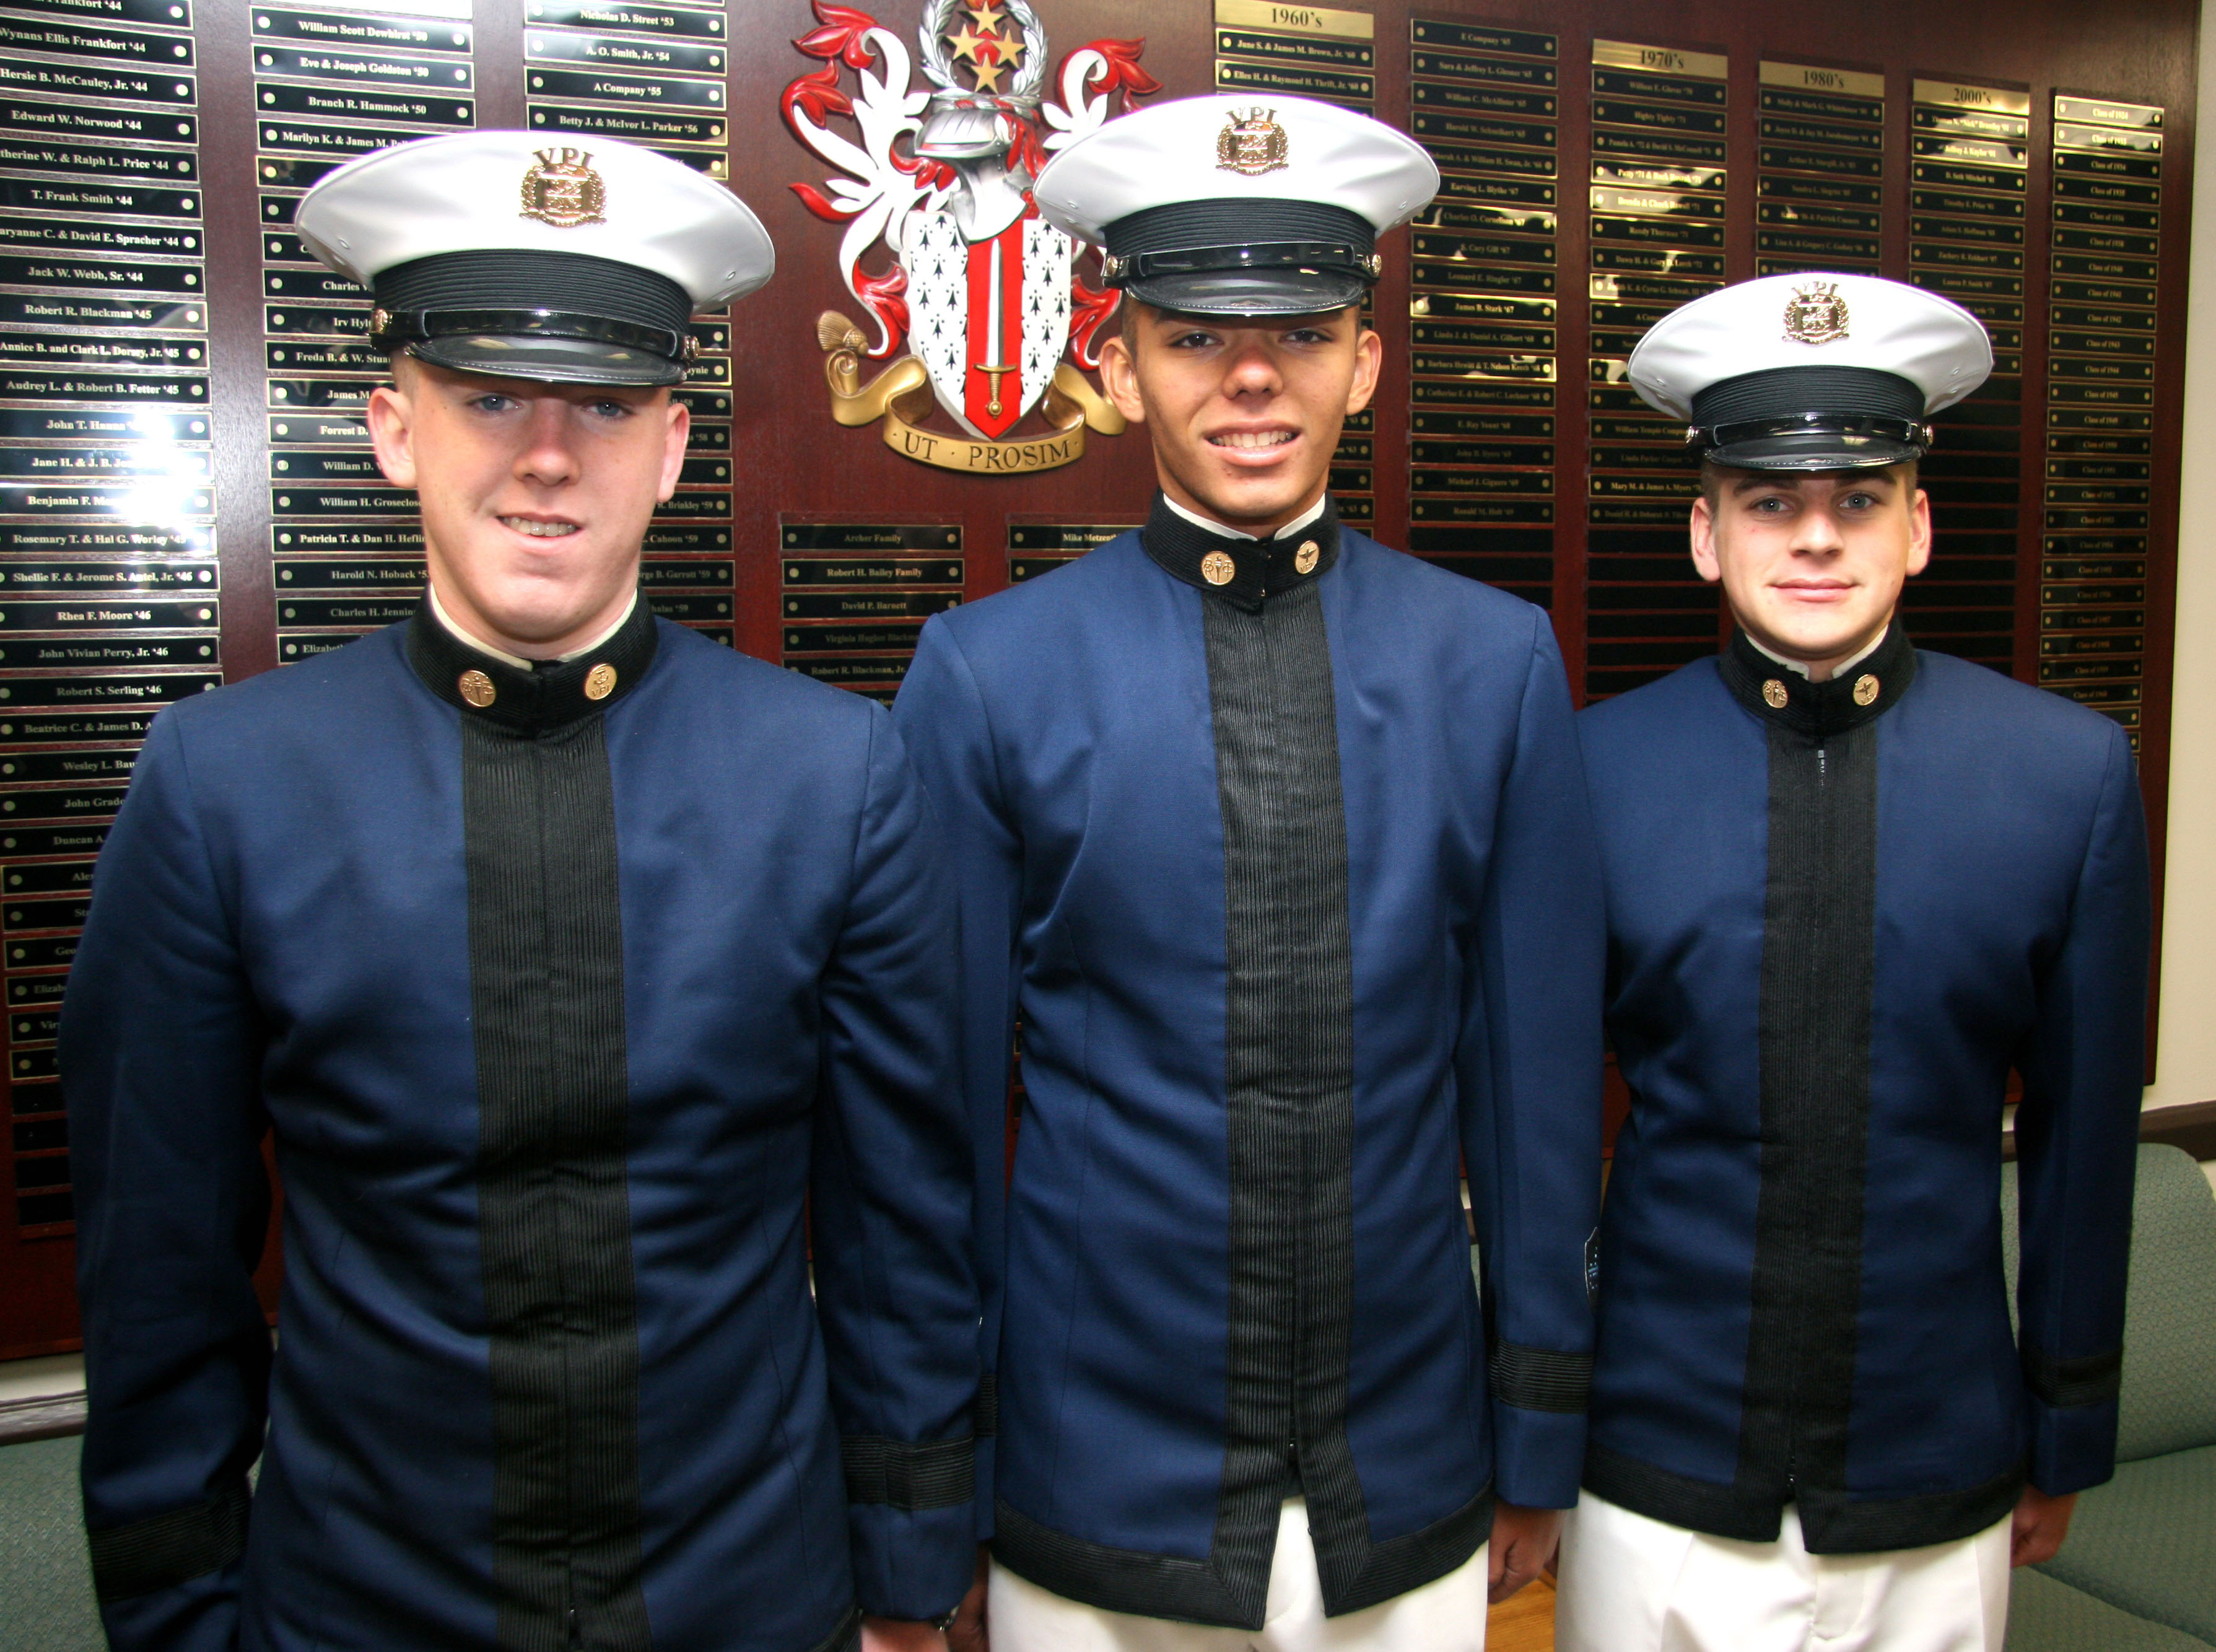 From left to right are Cadets Evan Glynn, Zachary Baranek, and Tyler Wallis